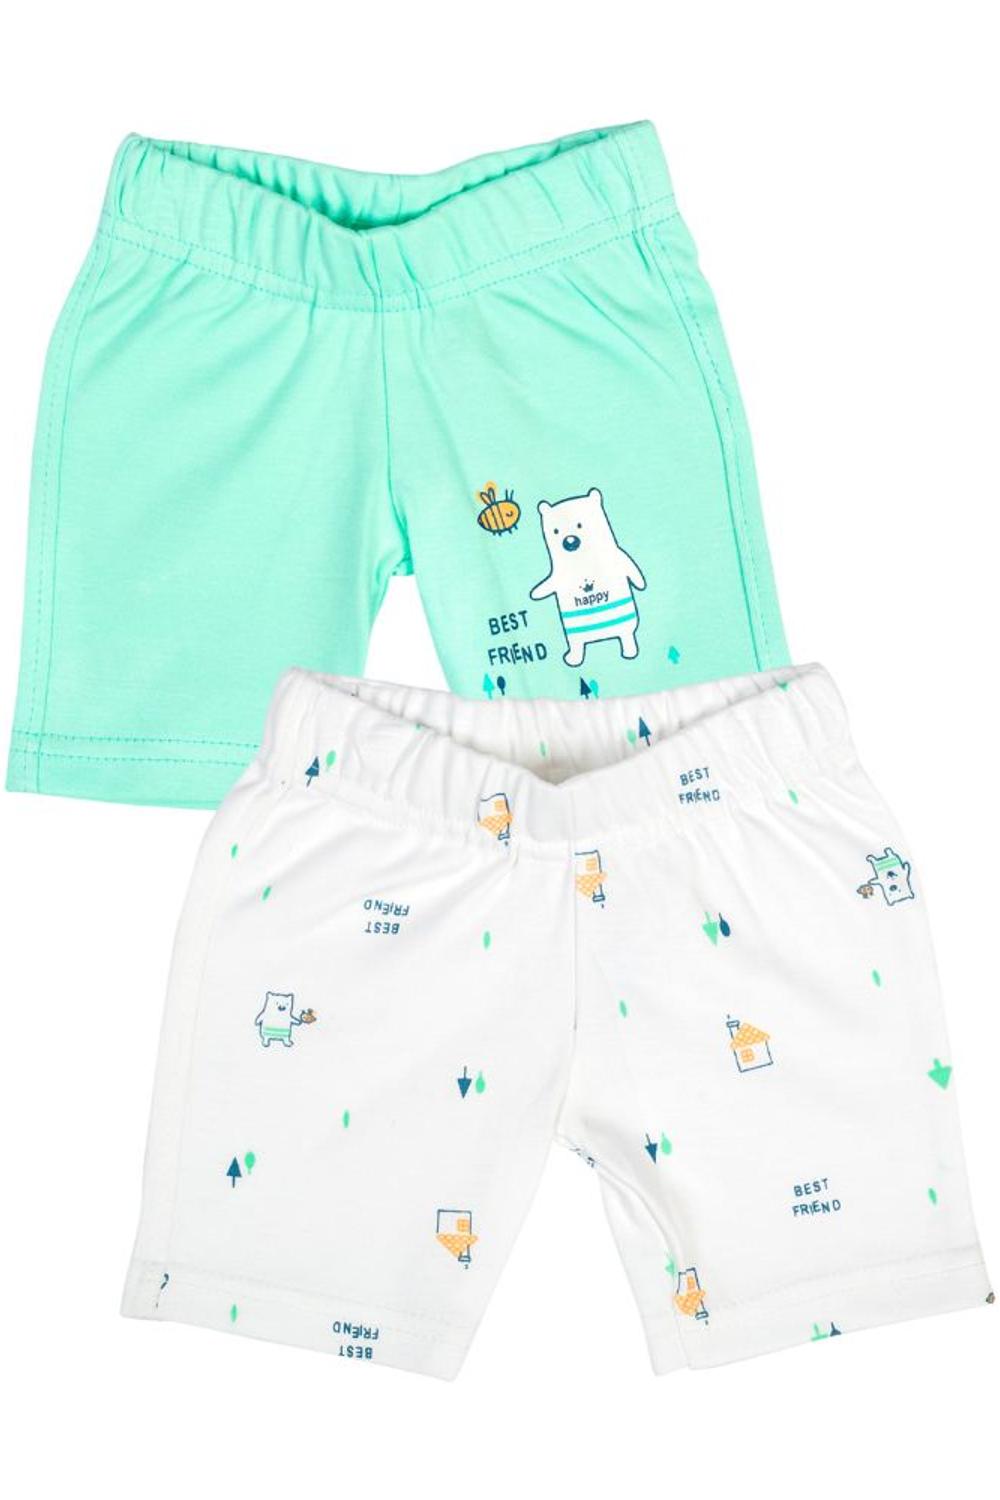 Mee Mee Baby White  Mint Green Shorts - Pack Of 2